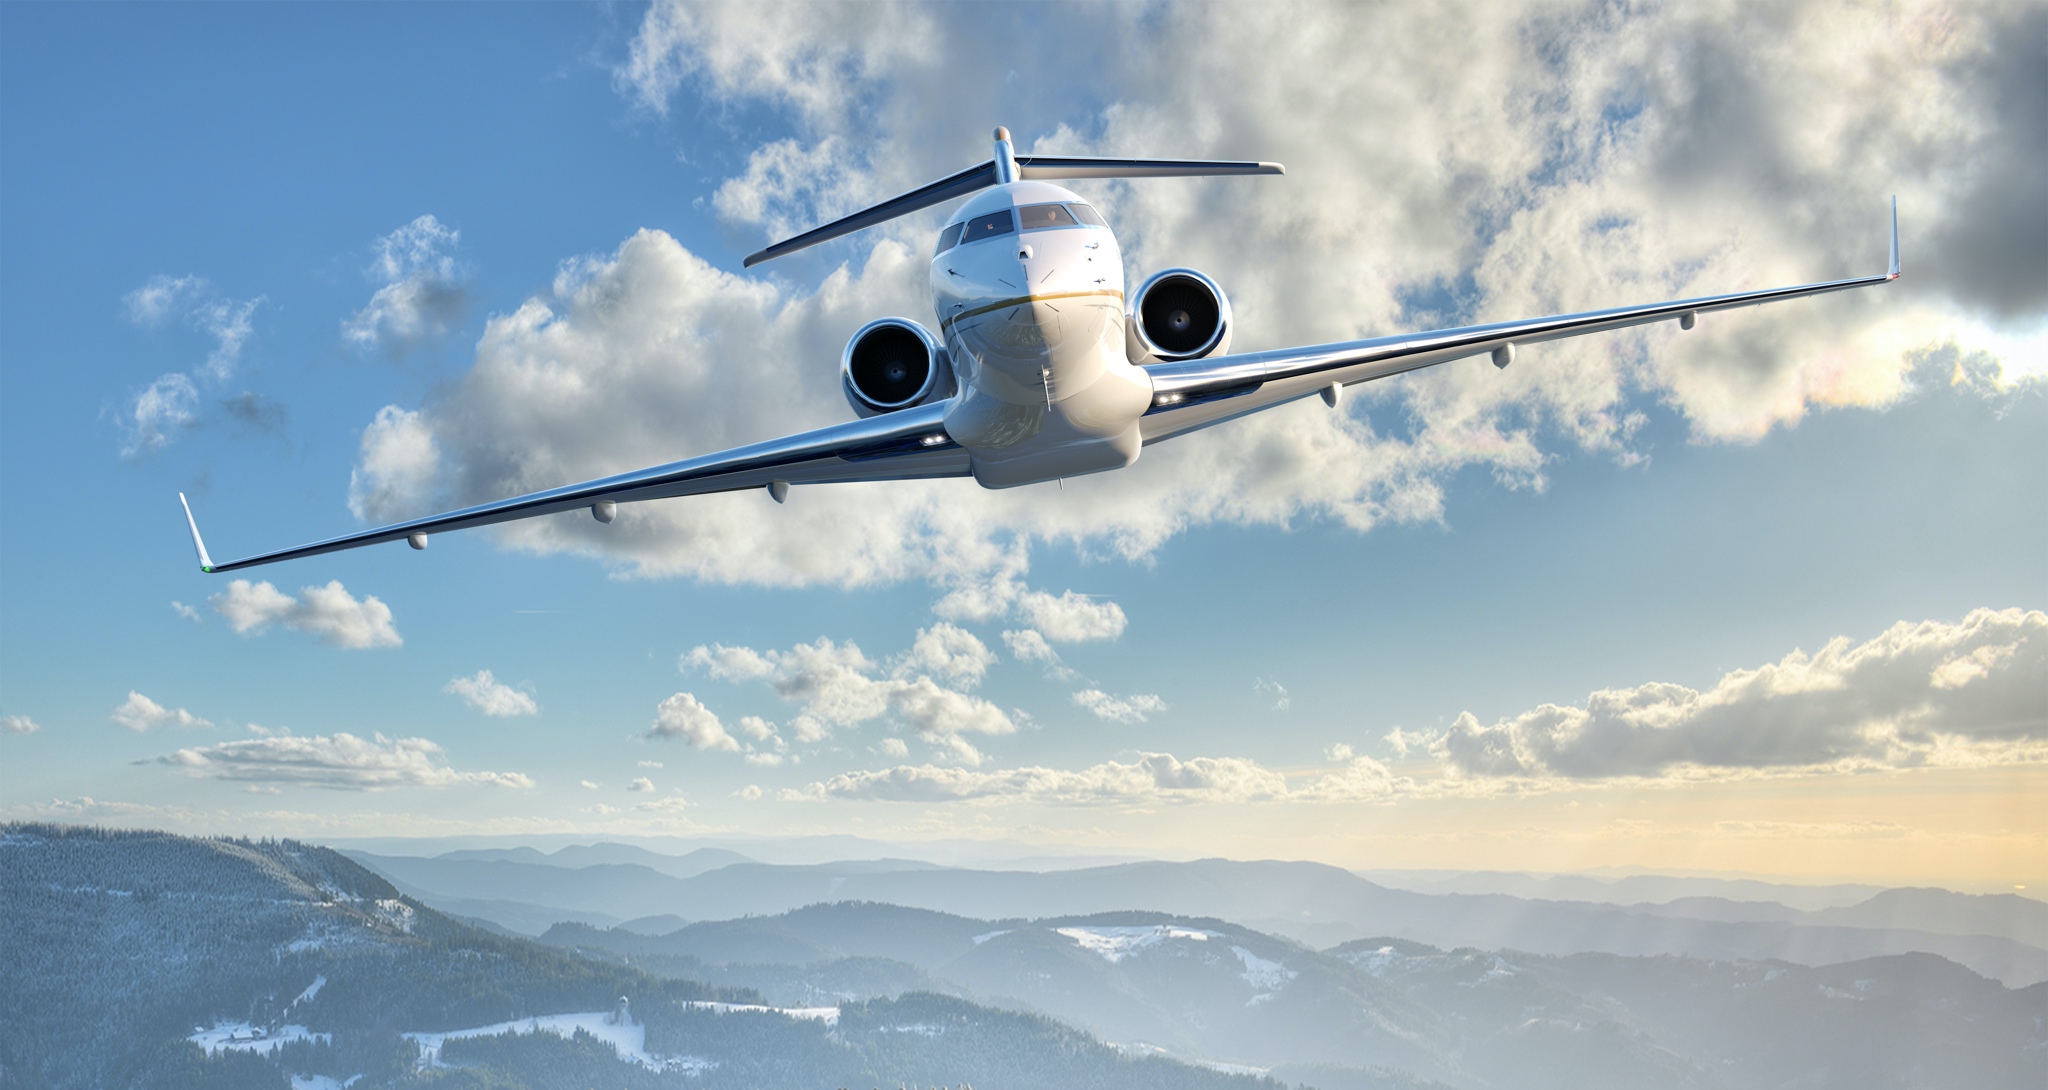 Bombardier’s New Global 6500 Business Jet Is Powered By Rolls-Royce Pearl Engine